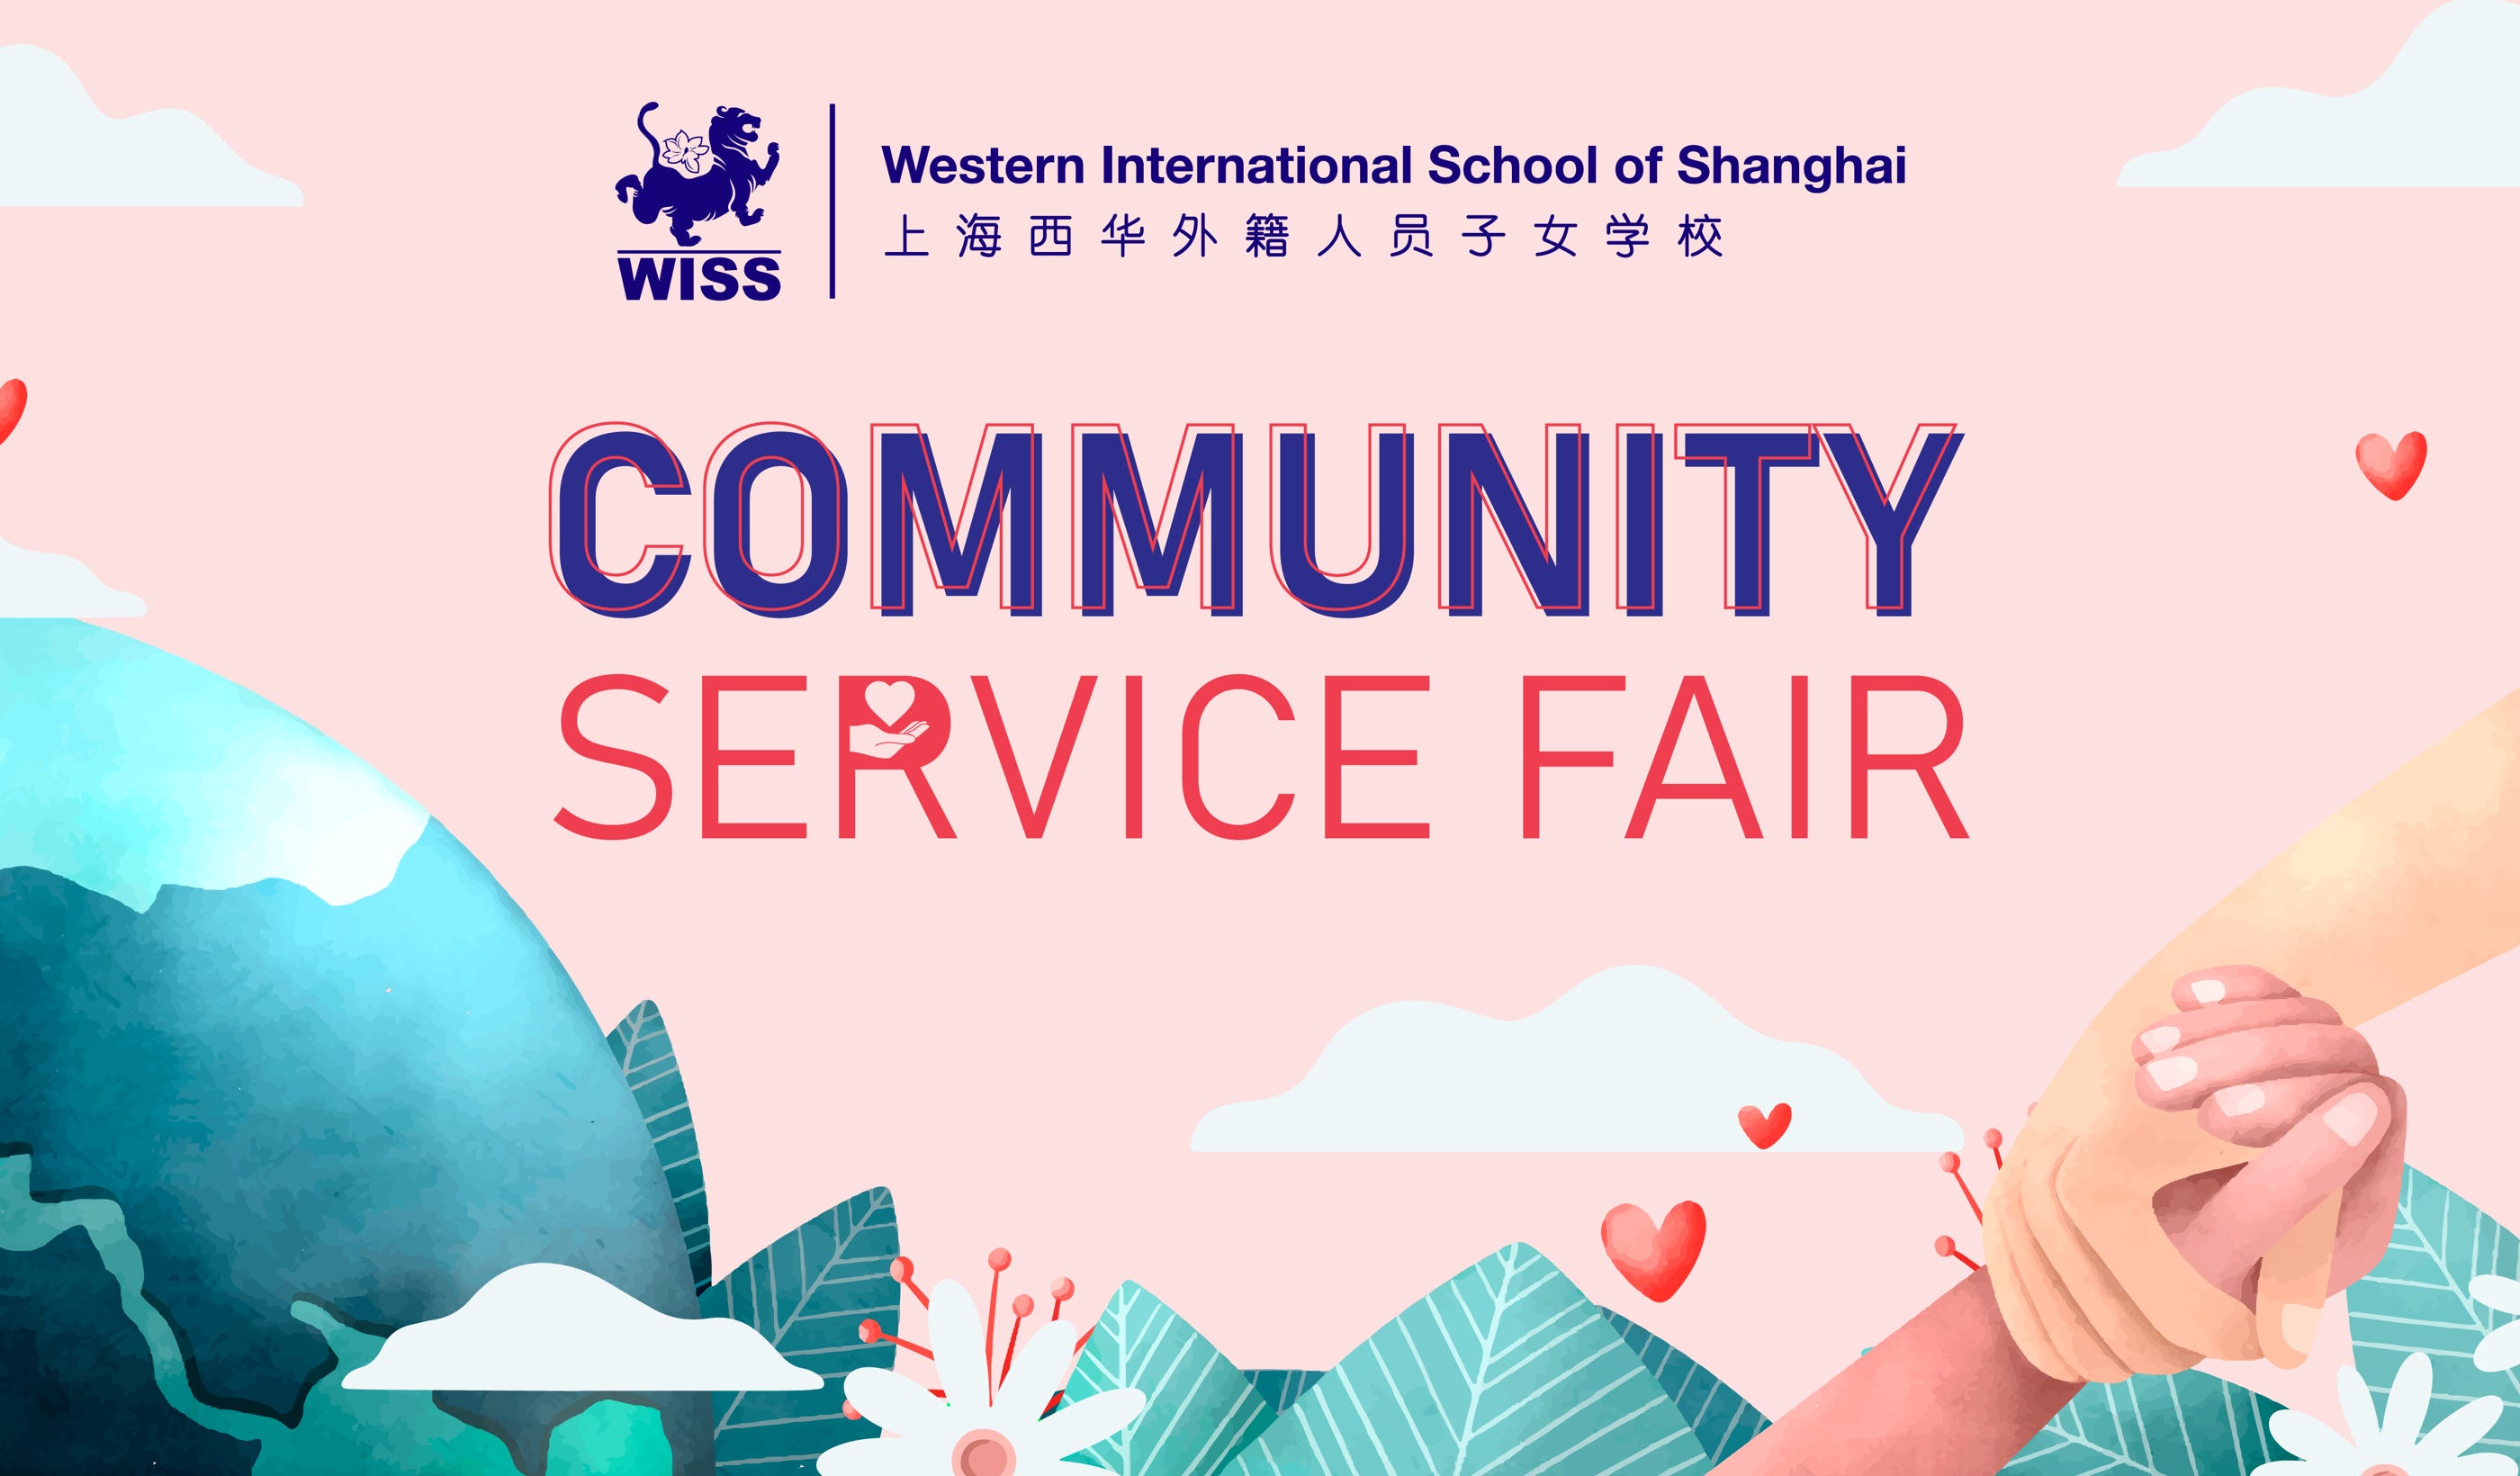 The Western International School of Shanghai (WISS) has a rich history of actively serving its community through a variety of impactful initiatives. One standout effort is the recent WISS Community Service Fair, which exemplifies the school's unwavering dedication to community engagement and social responsibility.   Community service at WISS transcends mere volunteerism; it is deeply ingrained in the school's academic curriculum. Students leverage their acquired knowledge and skills from academic courses to tackle real-world challenges, effectively bridging the gap between theory and practice. This hands-on educational approach equips students with the tools to address intricate societal issues and become proactive change-makers.